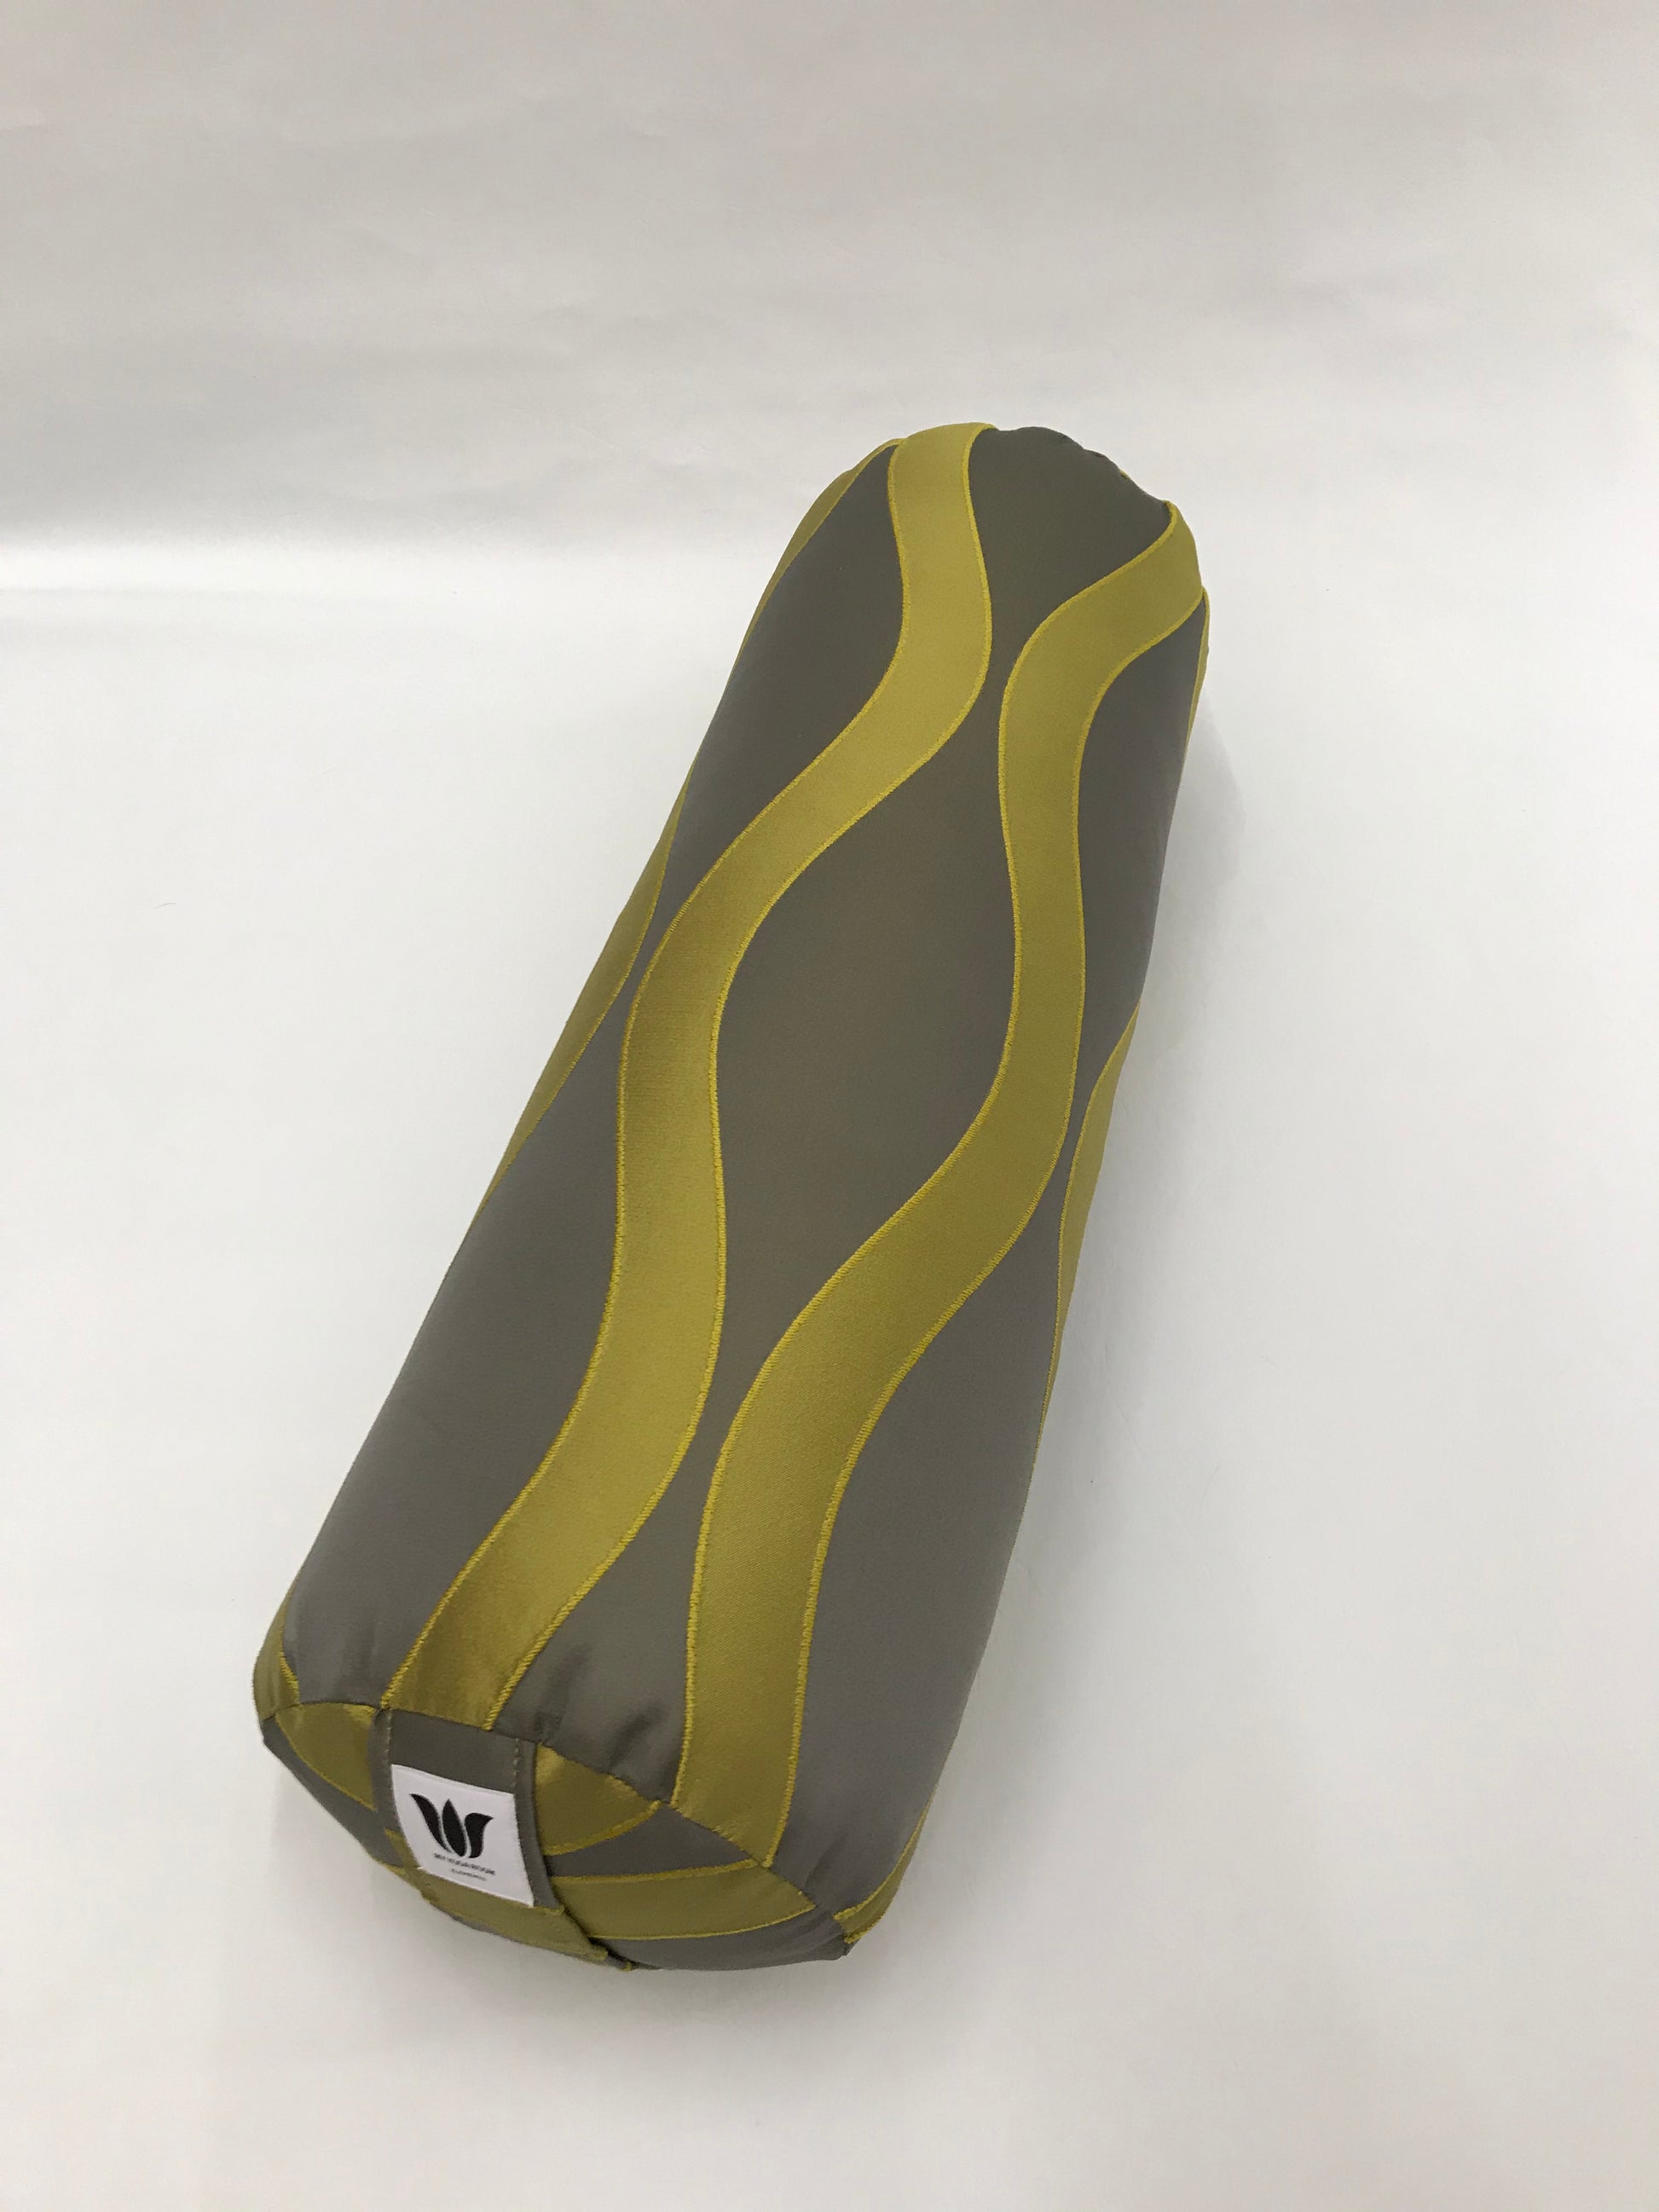 Round yoga bolster in modern graphic wave print, durable fabric, grey and green color fabric. Allergy conscious fill with removeable cover. Made in Canada by My Yoga Room Elements